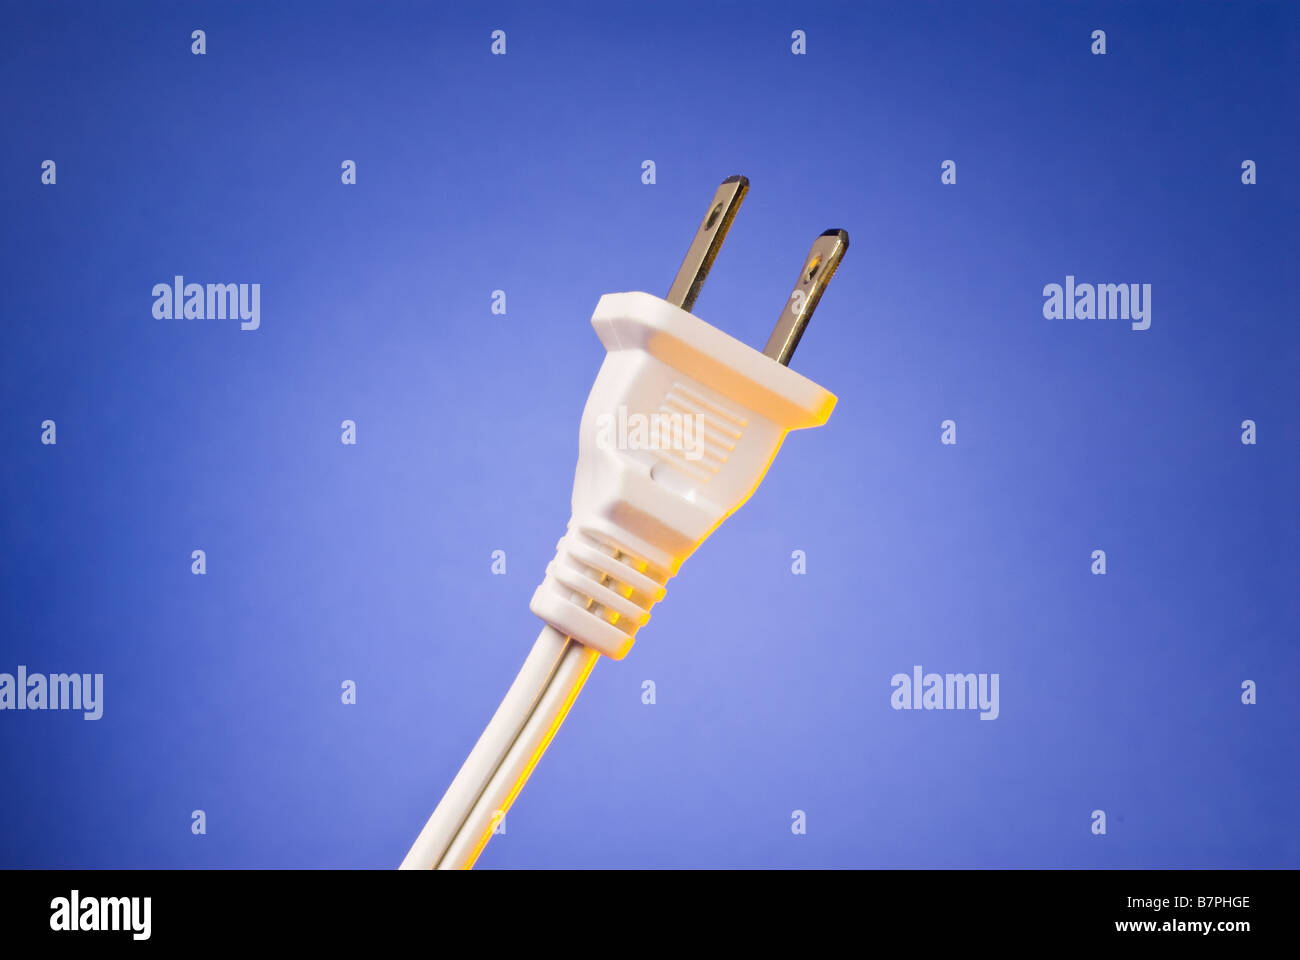 a two pronged polarized power cord and plug Stock Photo